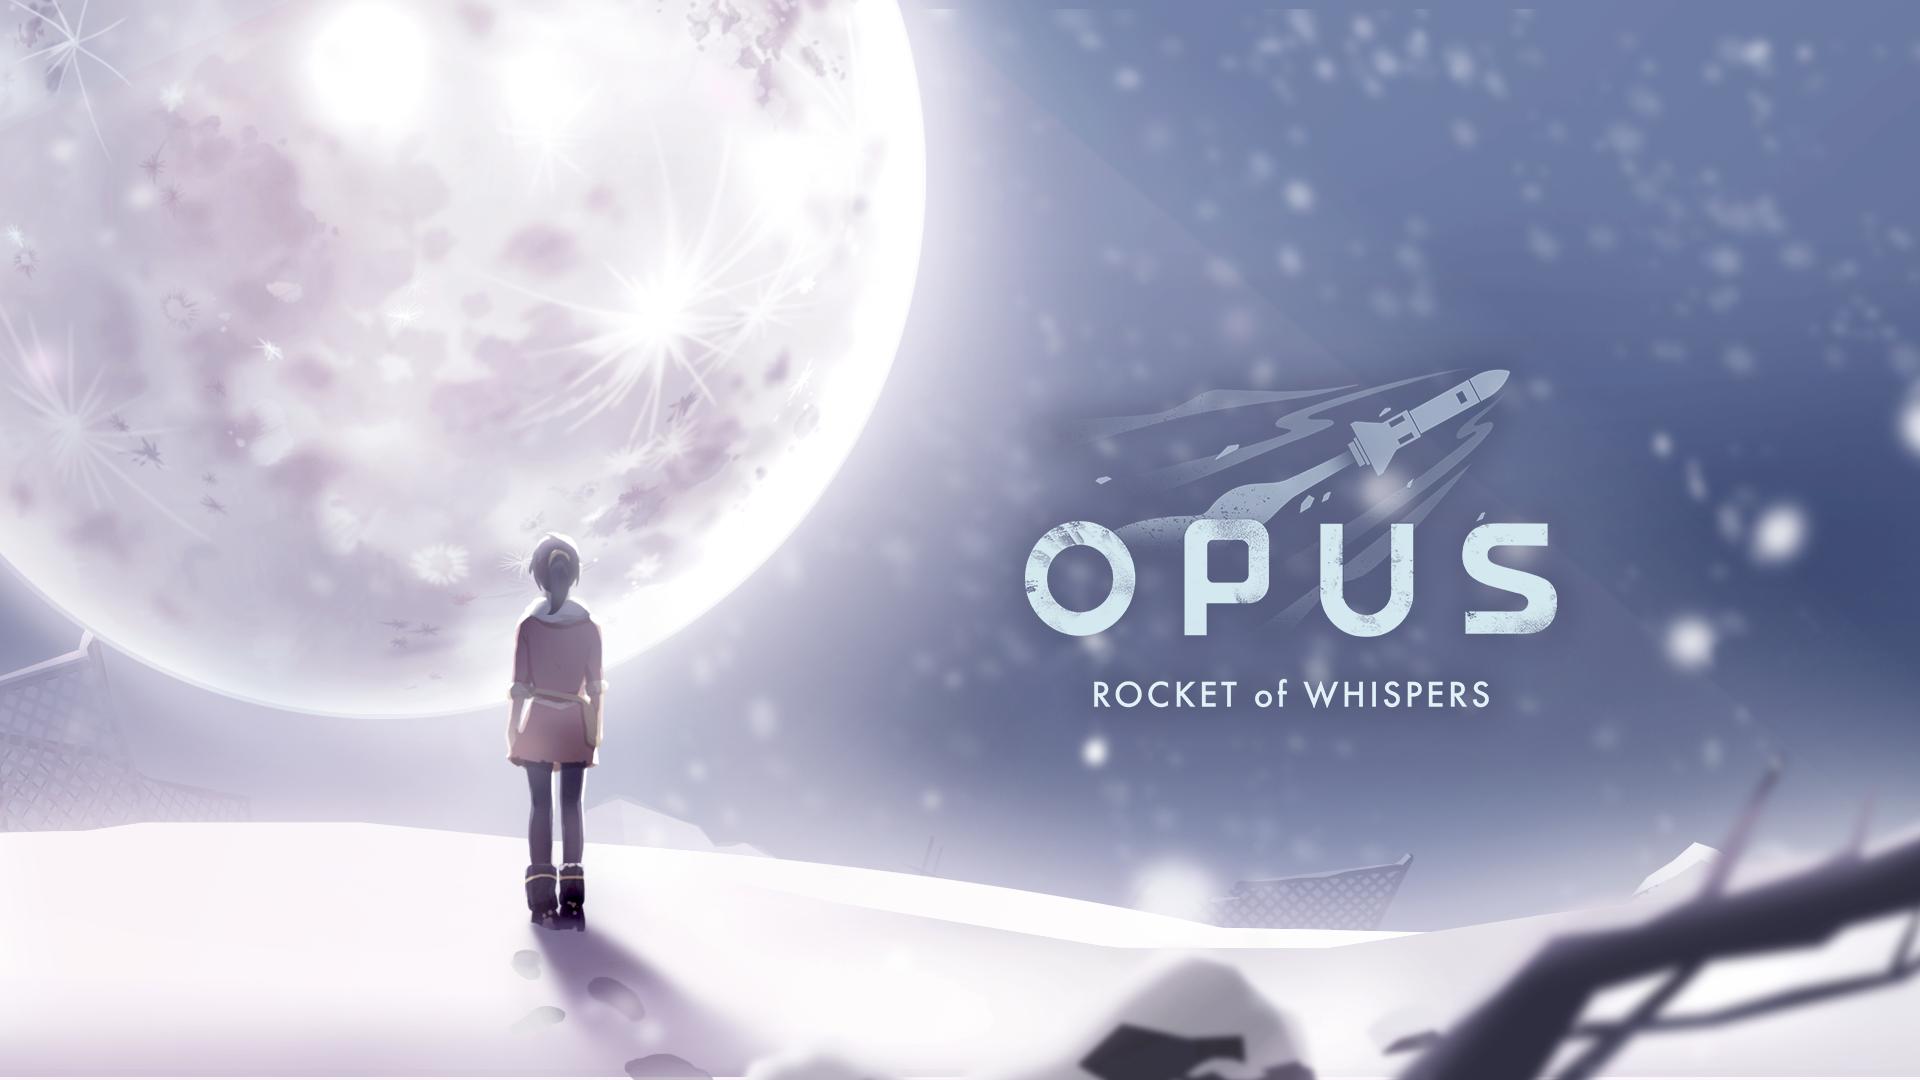 OPUS: Rocket of Whispers for Android - APK Download